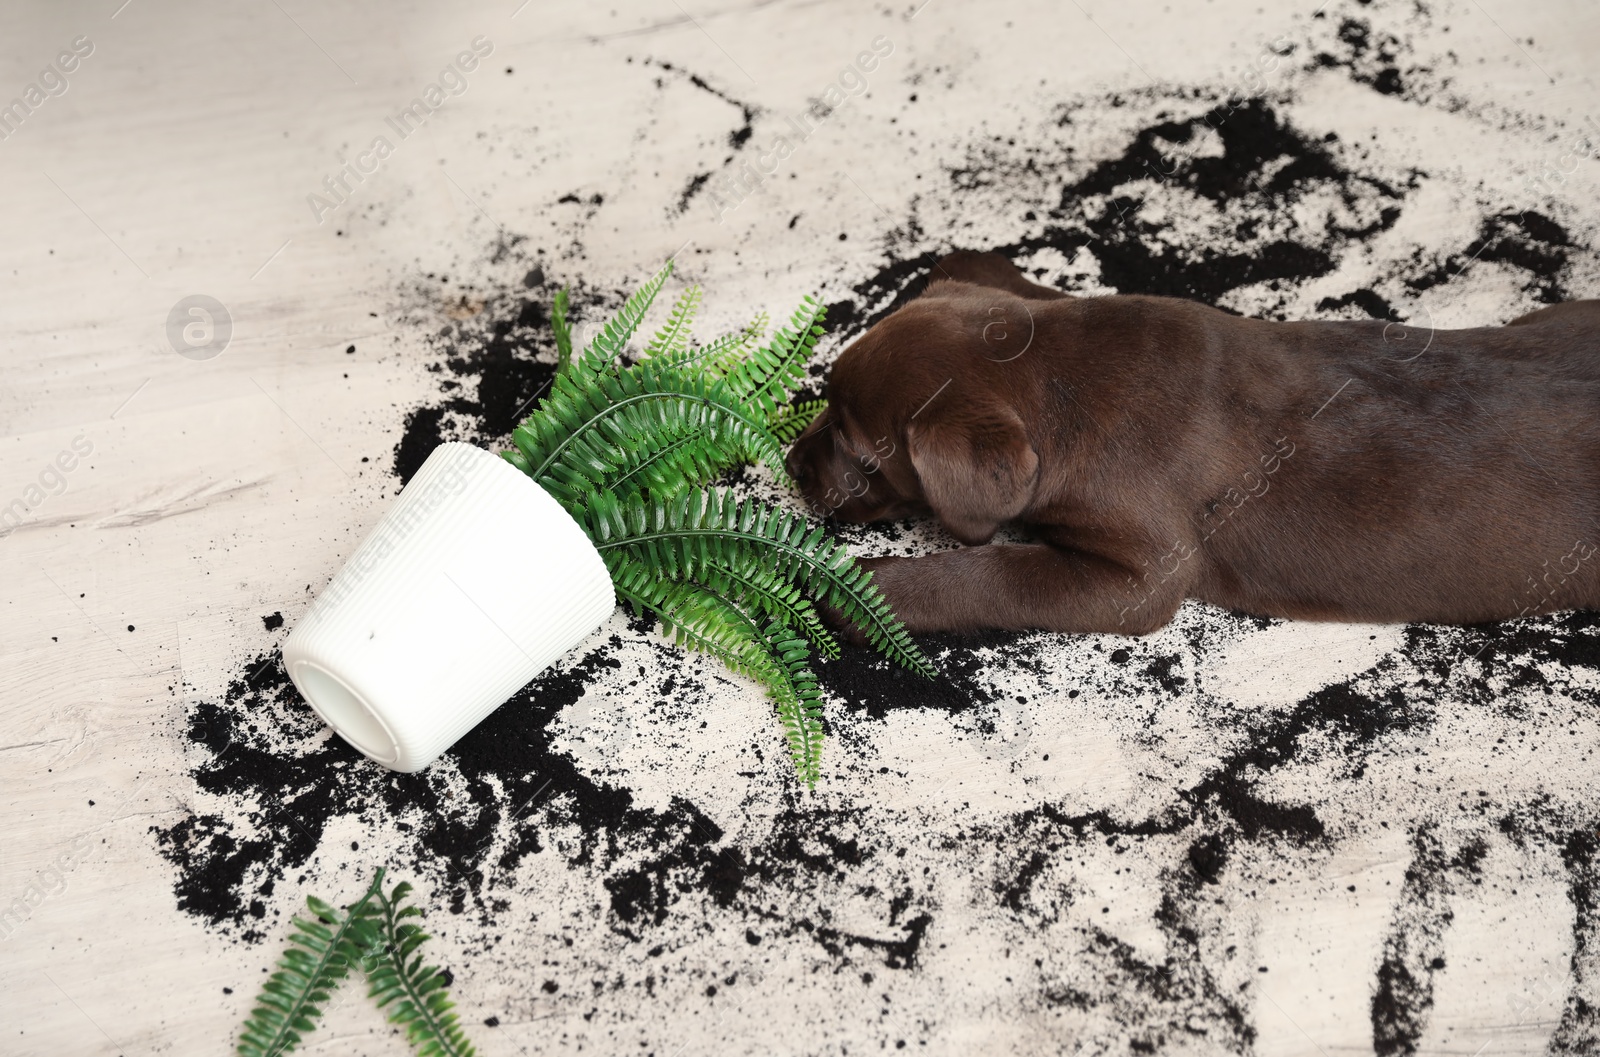 Photo of Chocolate Labrador Retriever puppy with overturned houseplant at home